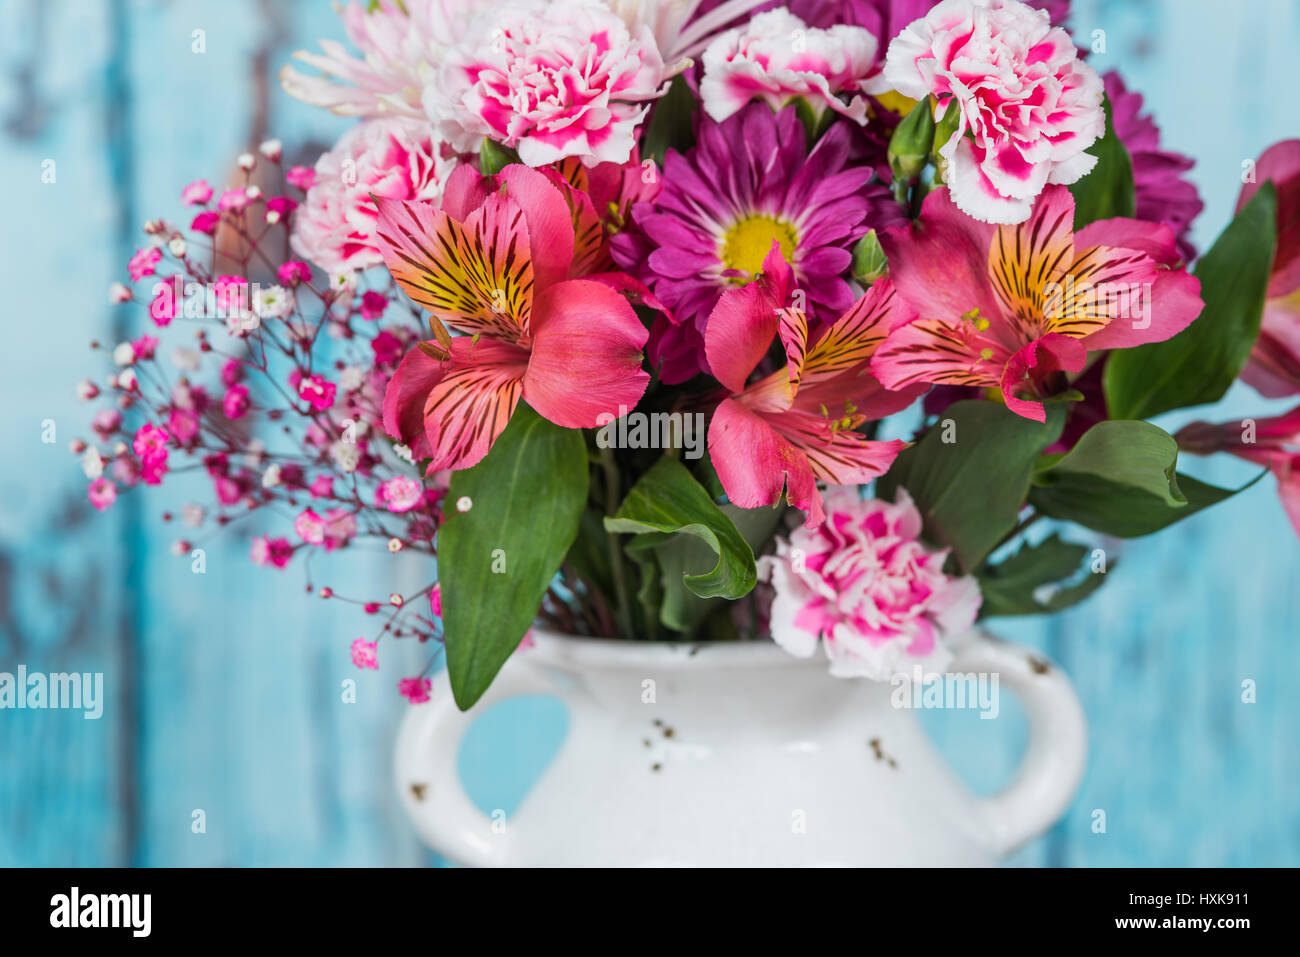 Bouquet of flowers in a vintage vase with blue wood background Stock Photo